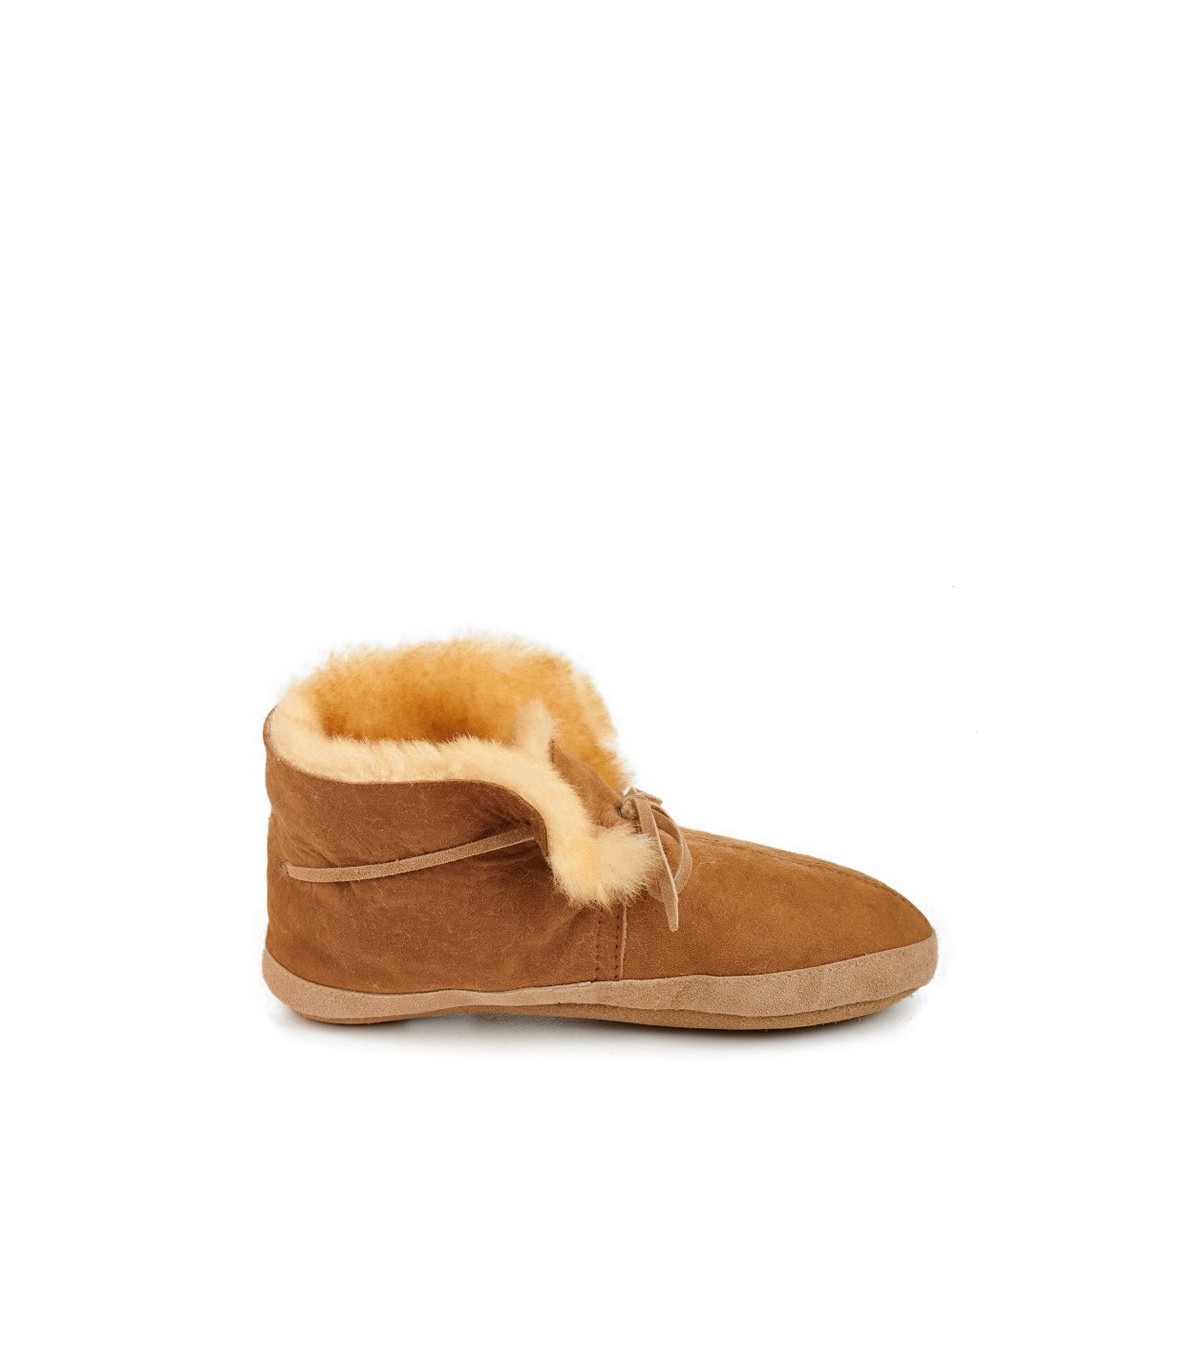 Fenland Ladies Sheepskin Slipper – Radford Leather Fashions-Quality Leather  and Sheepskin Jackets for Men and Women. Coventry, West Midlands, UK for  over 40 years